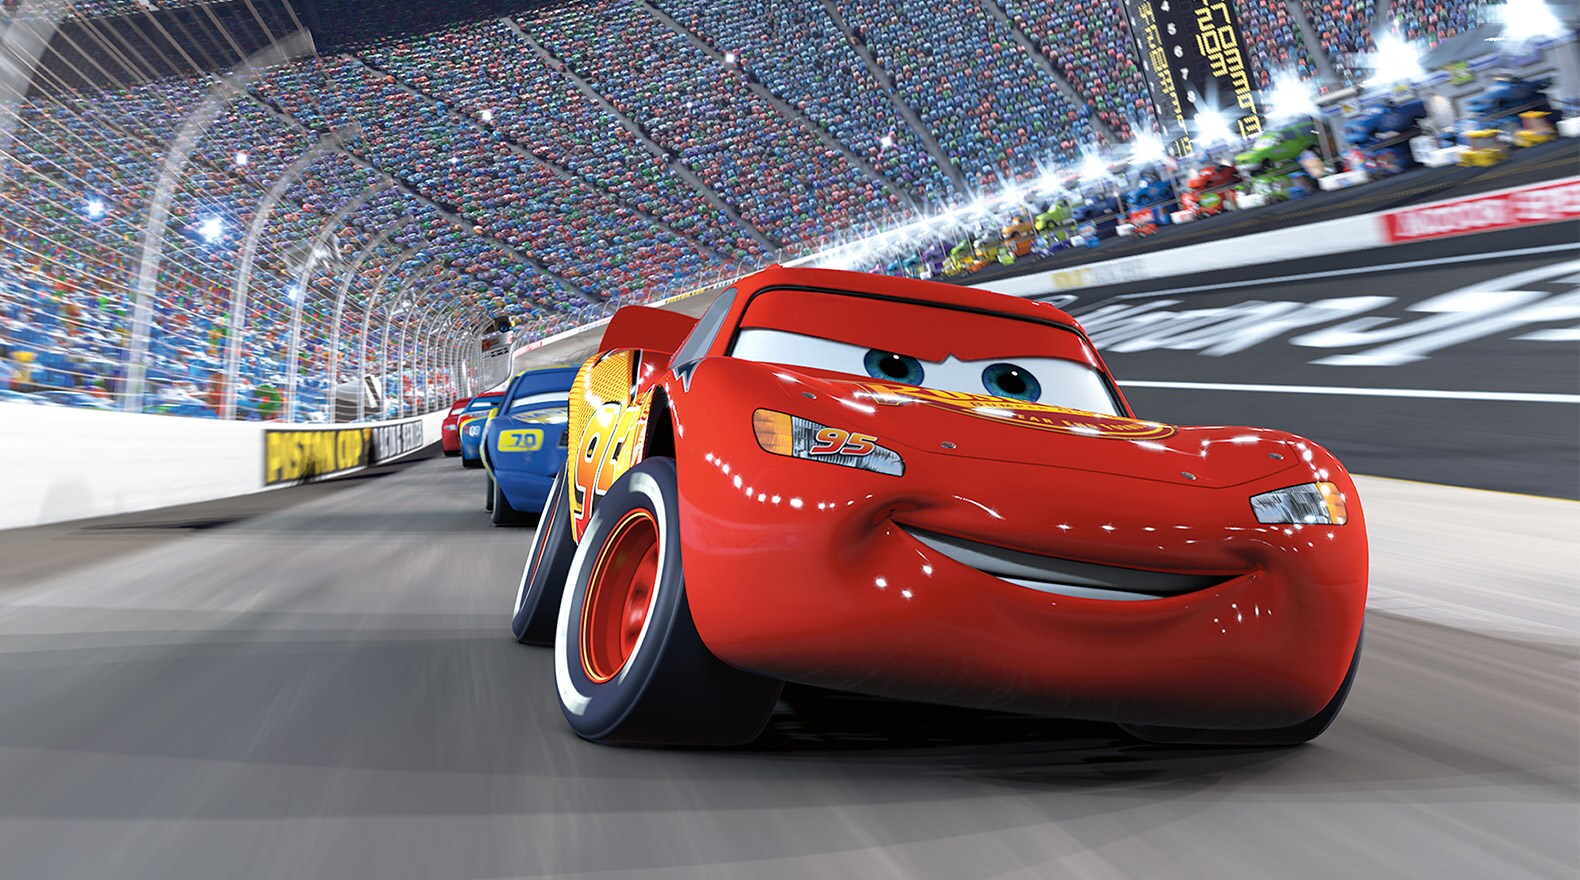 Exclusive photos: The many looks of 'Cars' racer Lightning McQueen